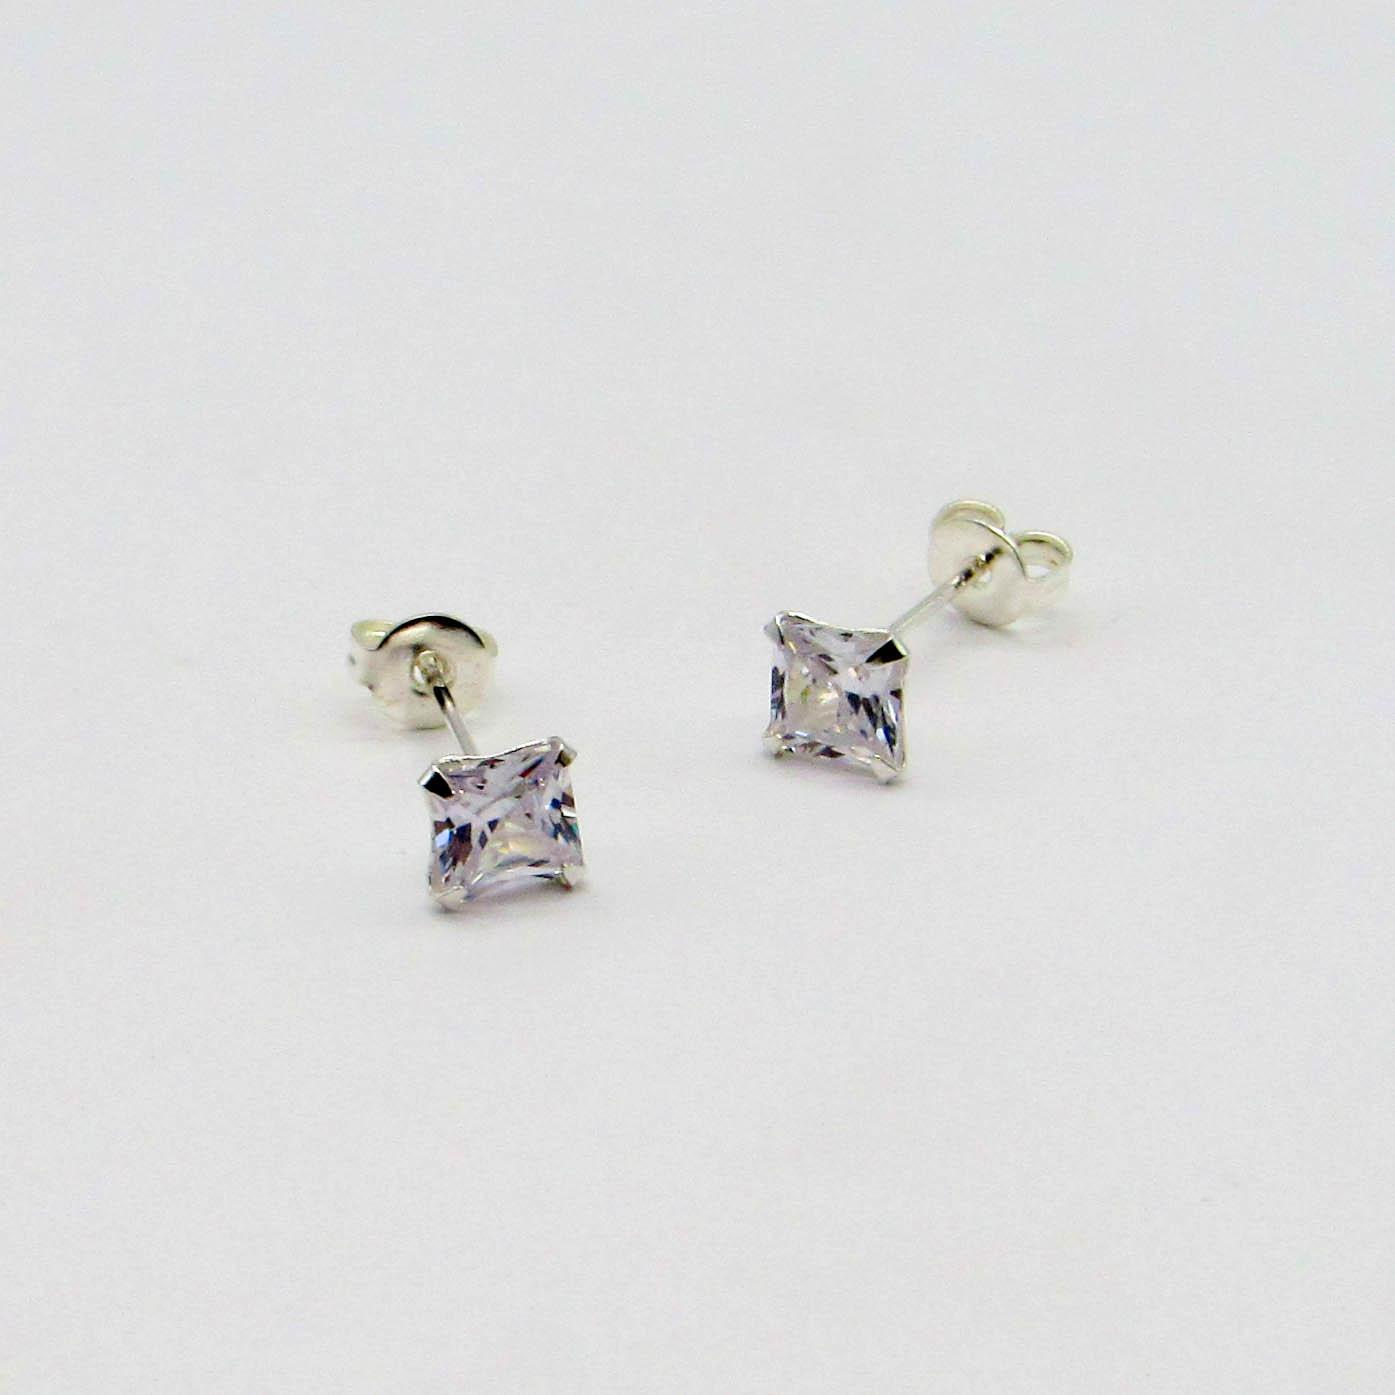 AROS CUBIC 5x5MM GRIFAS /PLATA